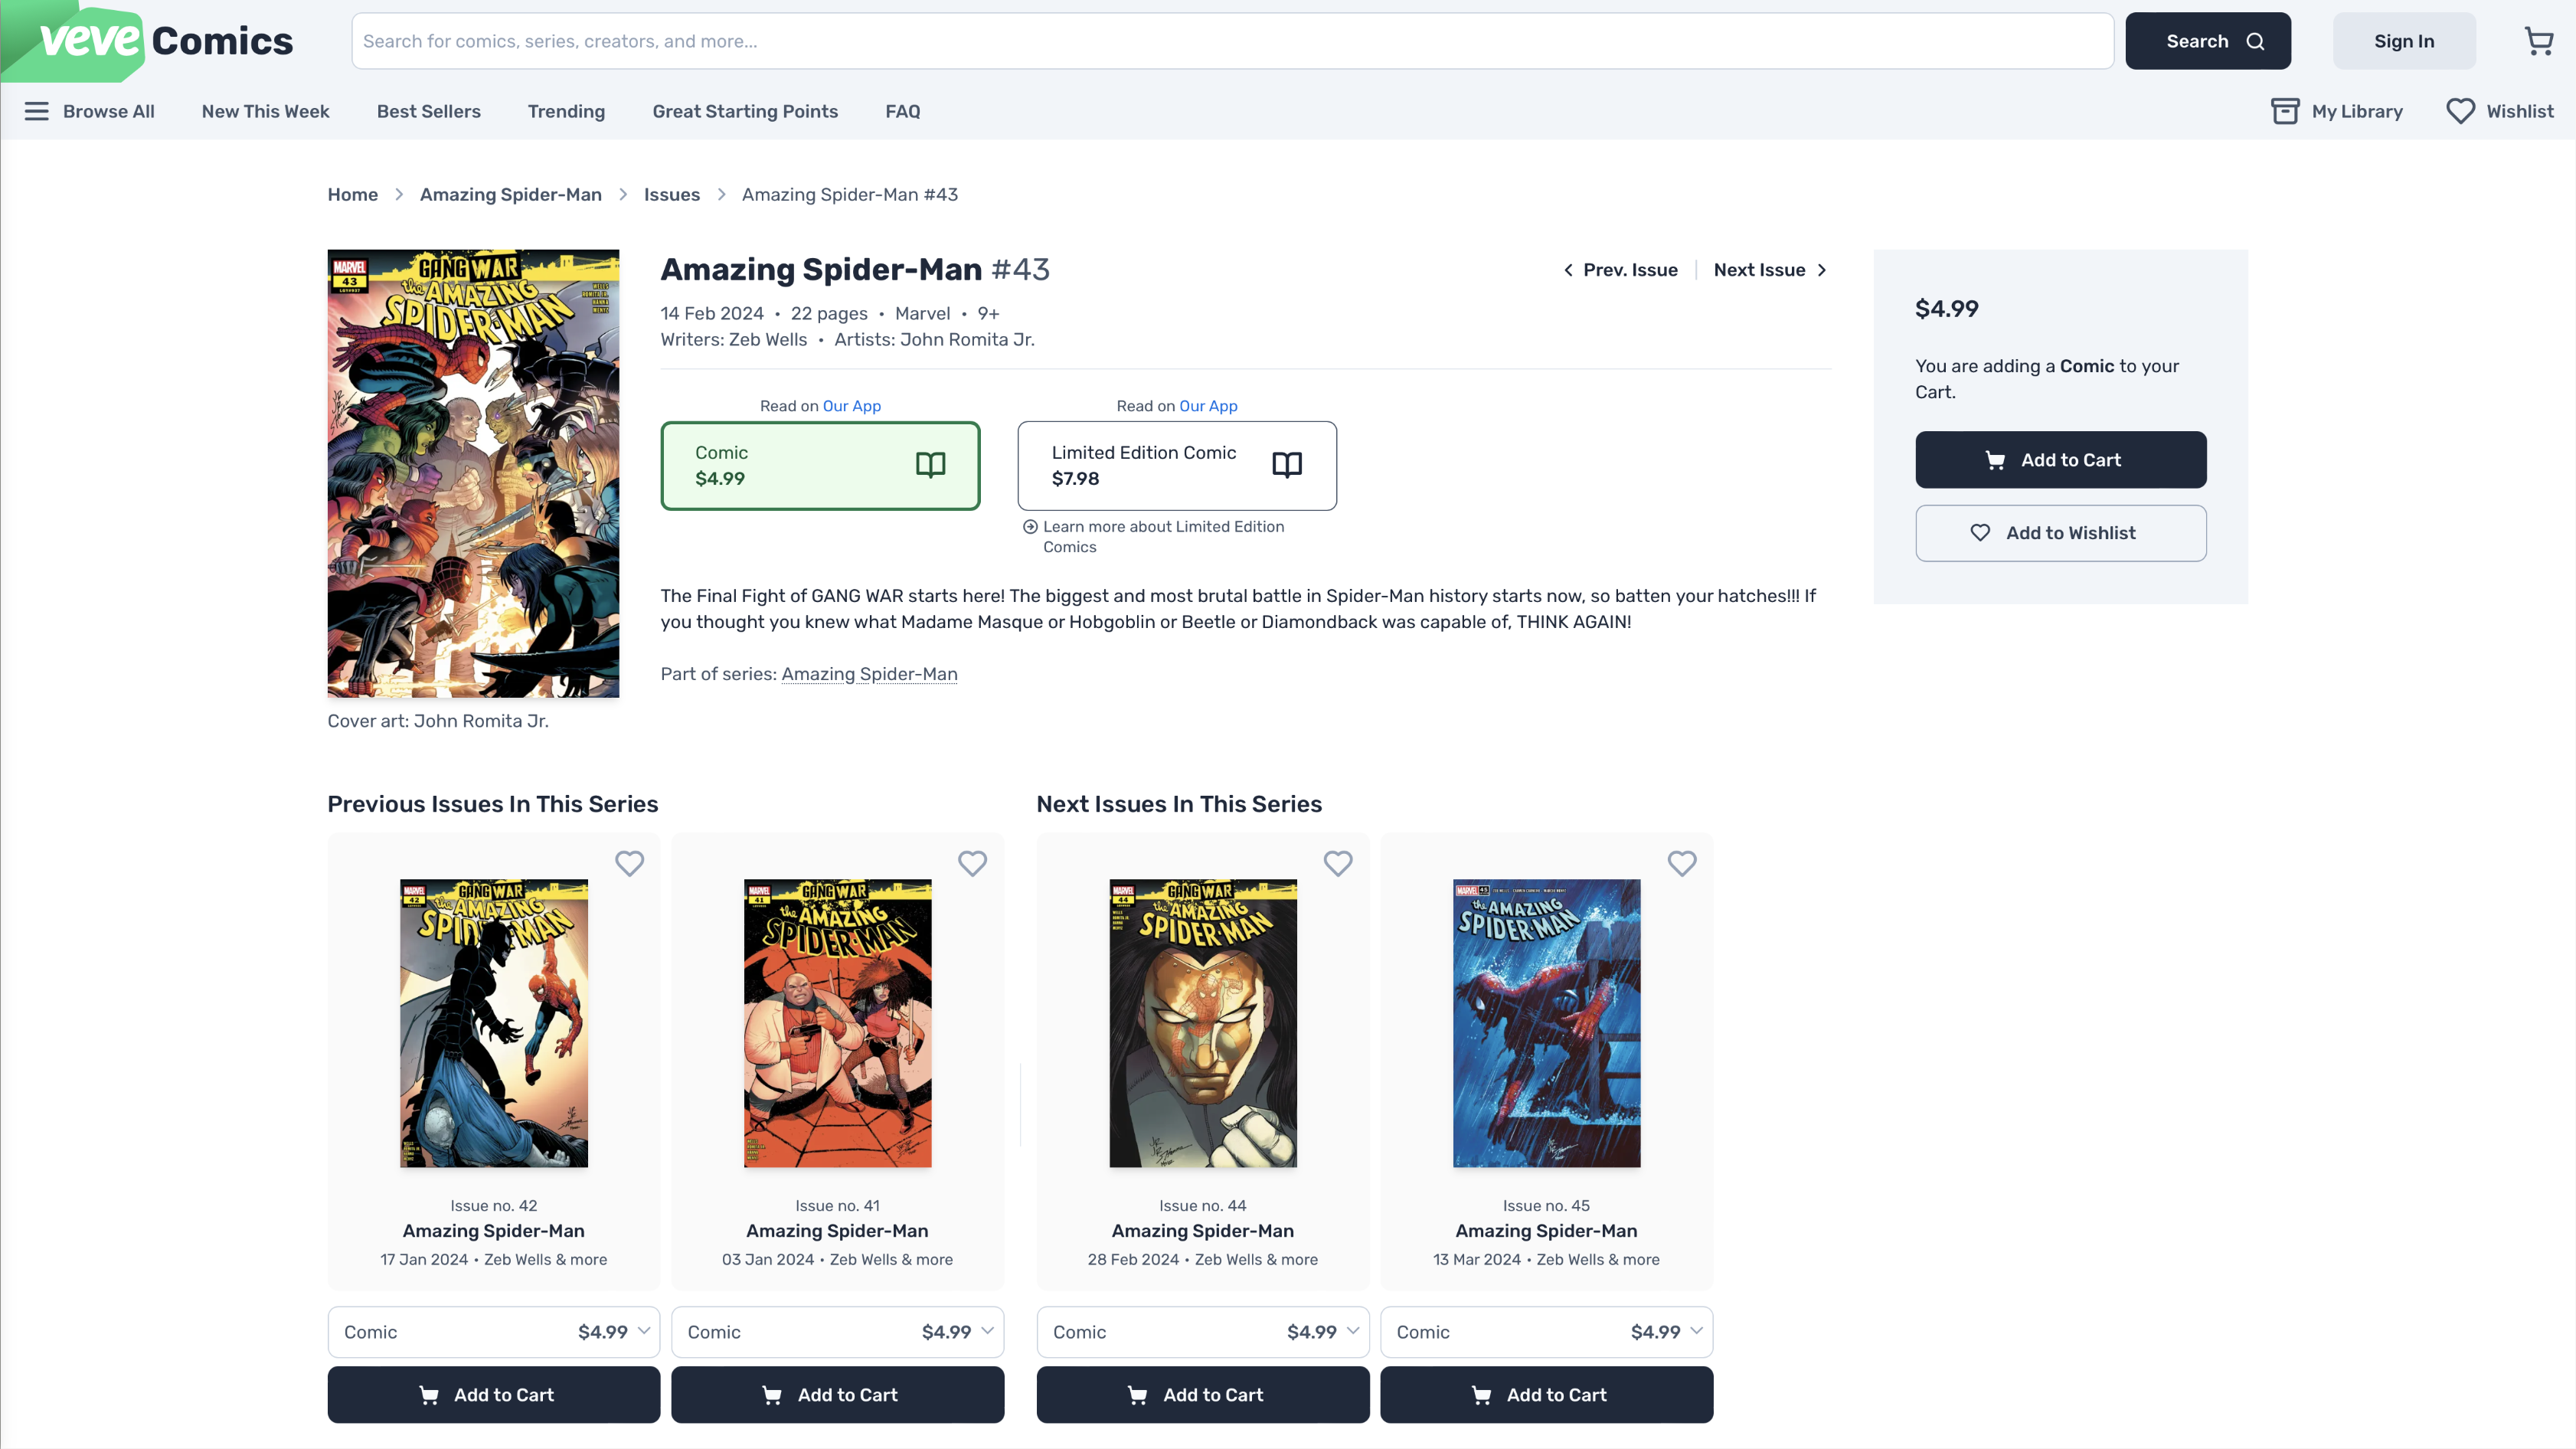 VeVe Comics product page in a desktop web browser